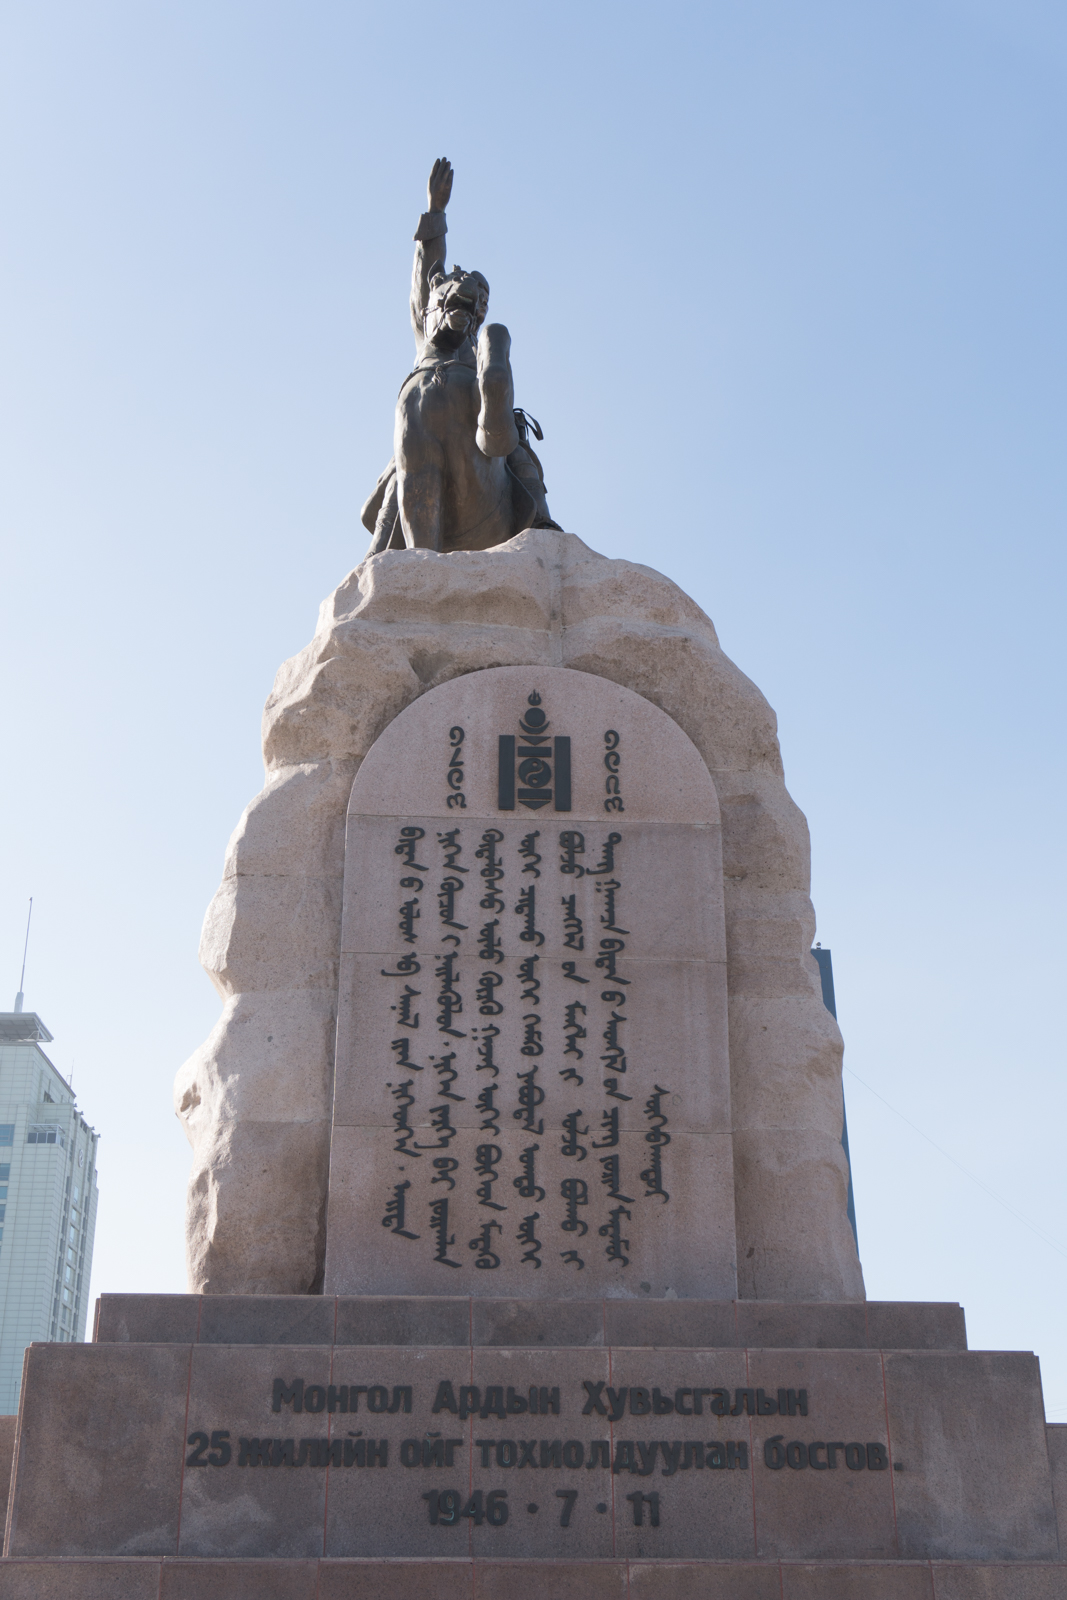 Monument in Ulan Bataar with Mongolian writing underneath